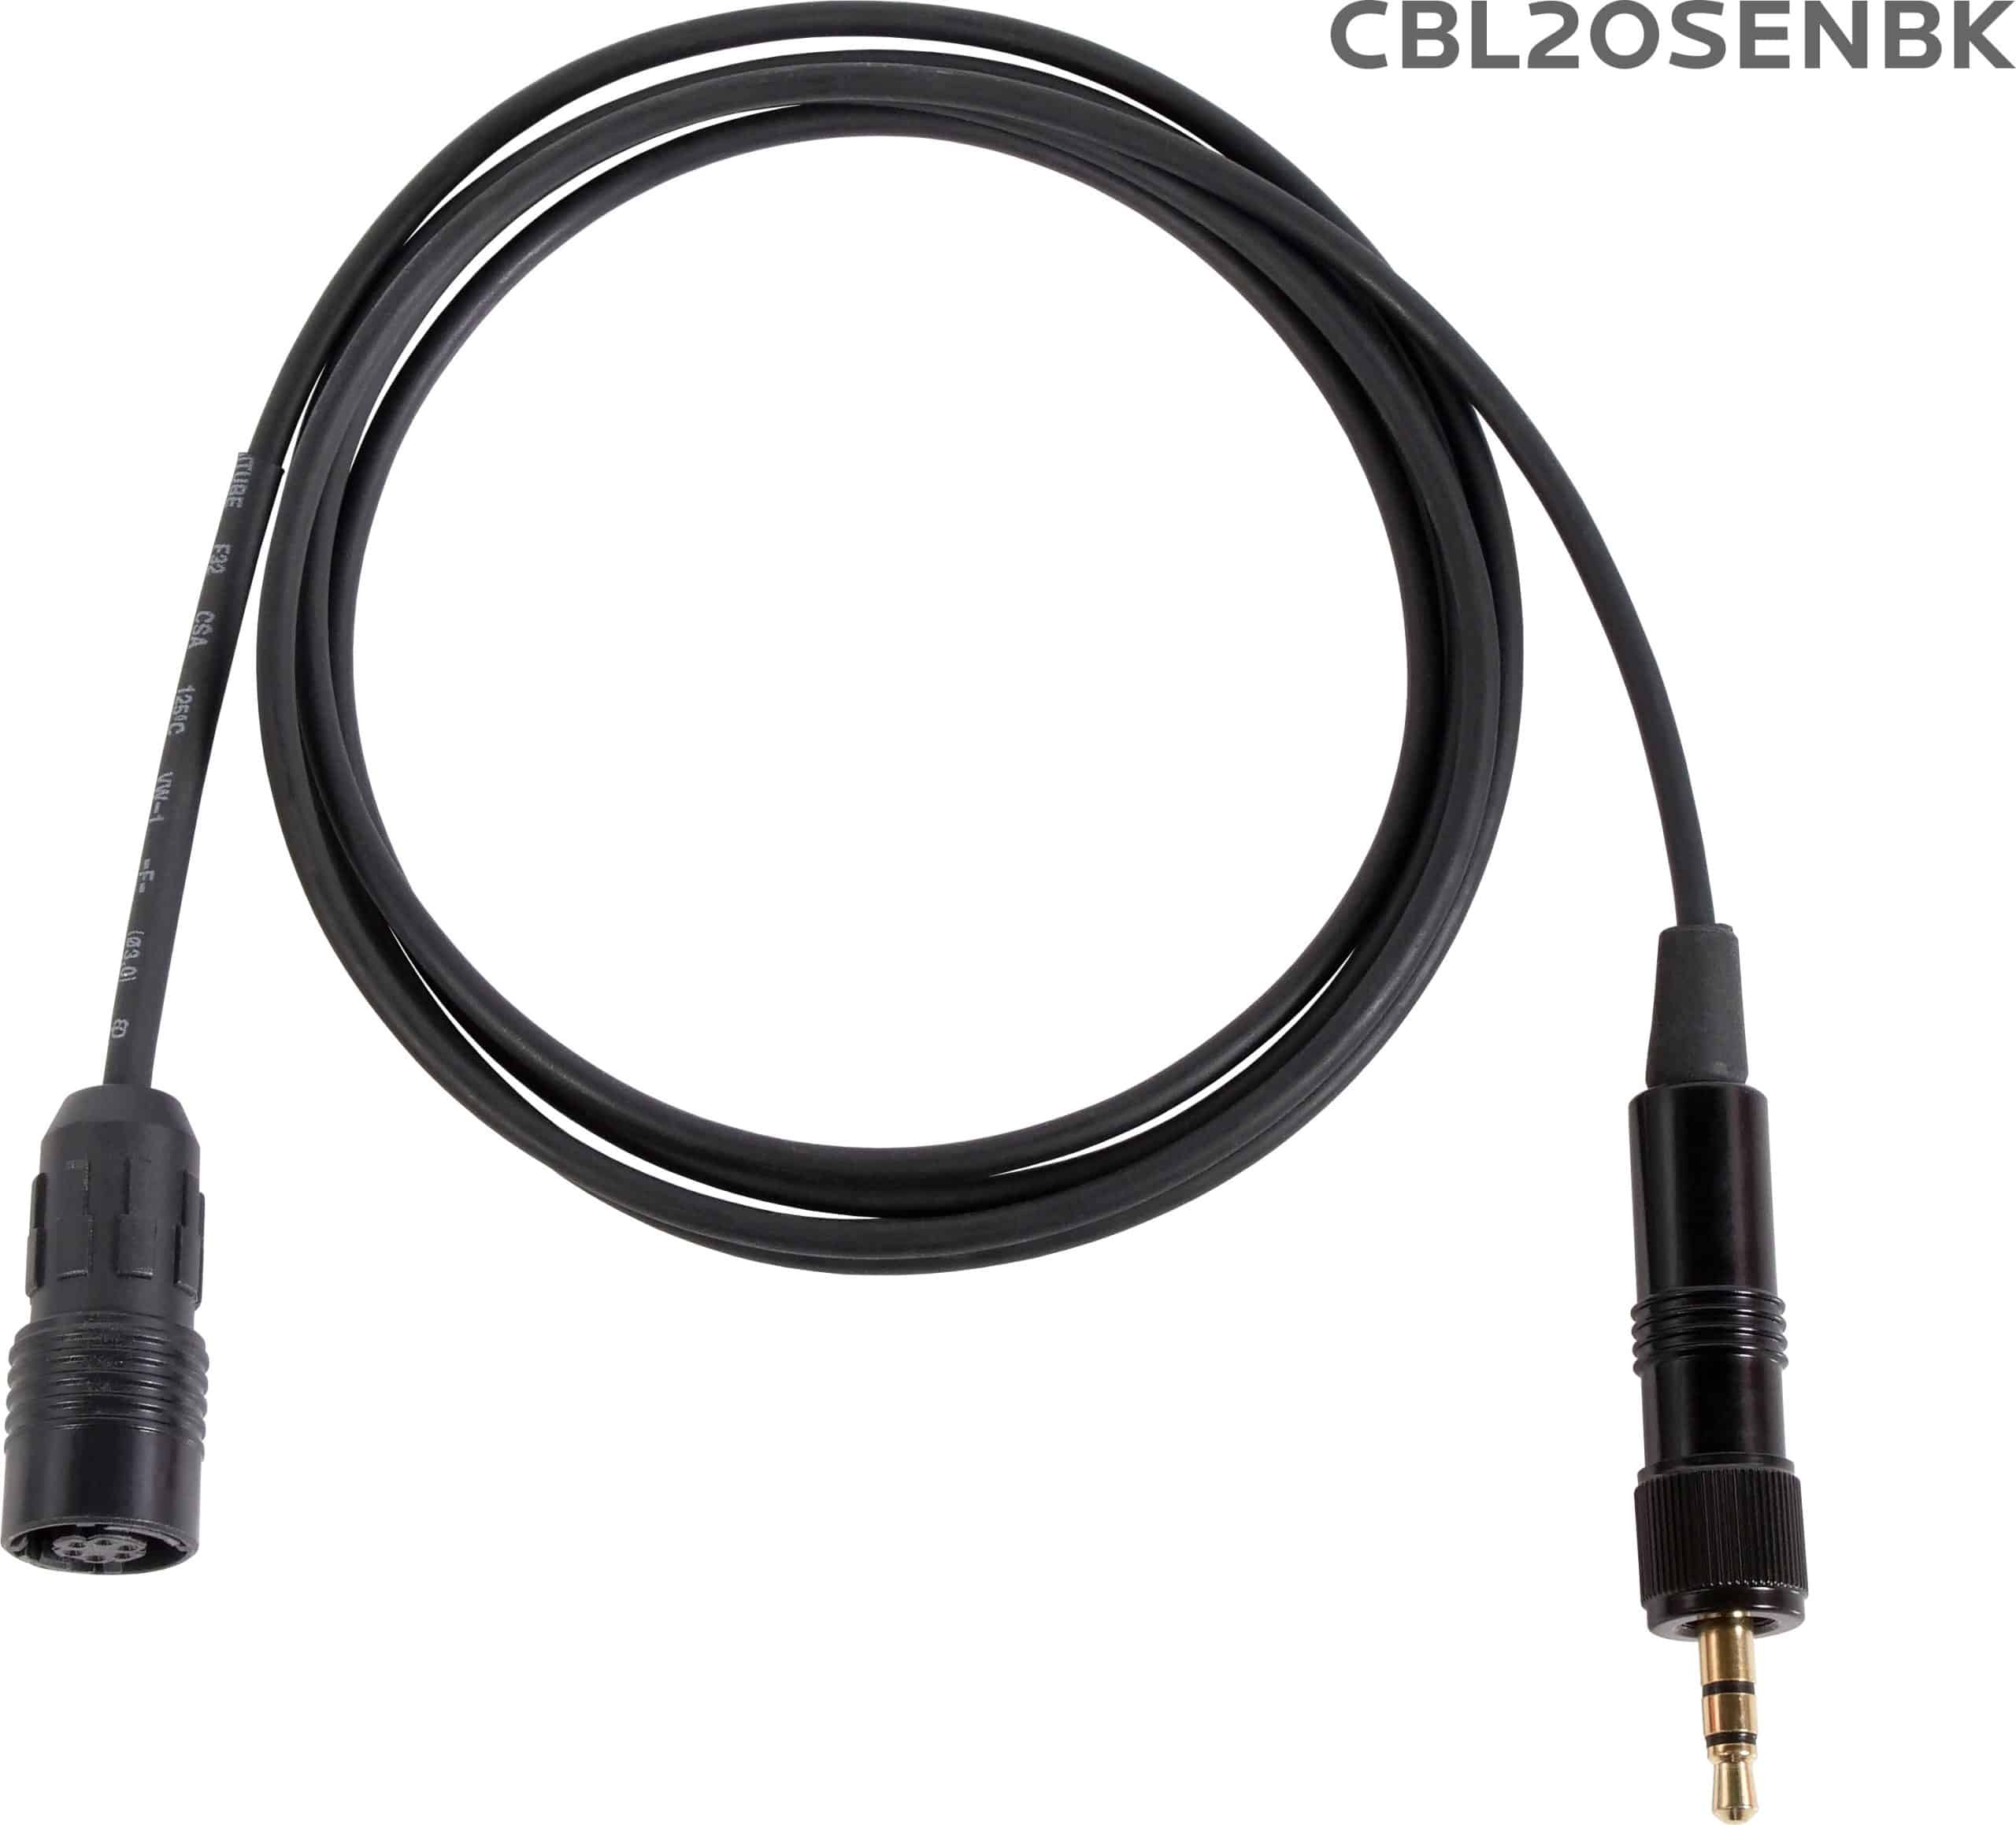 Replacement cable for H2O7 Wireless Headset Mic. The cable is wired to work with Sennheiser® systems.